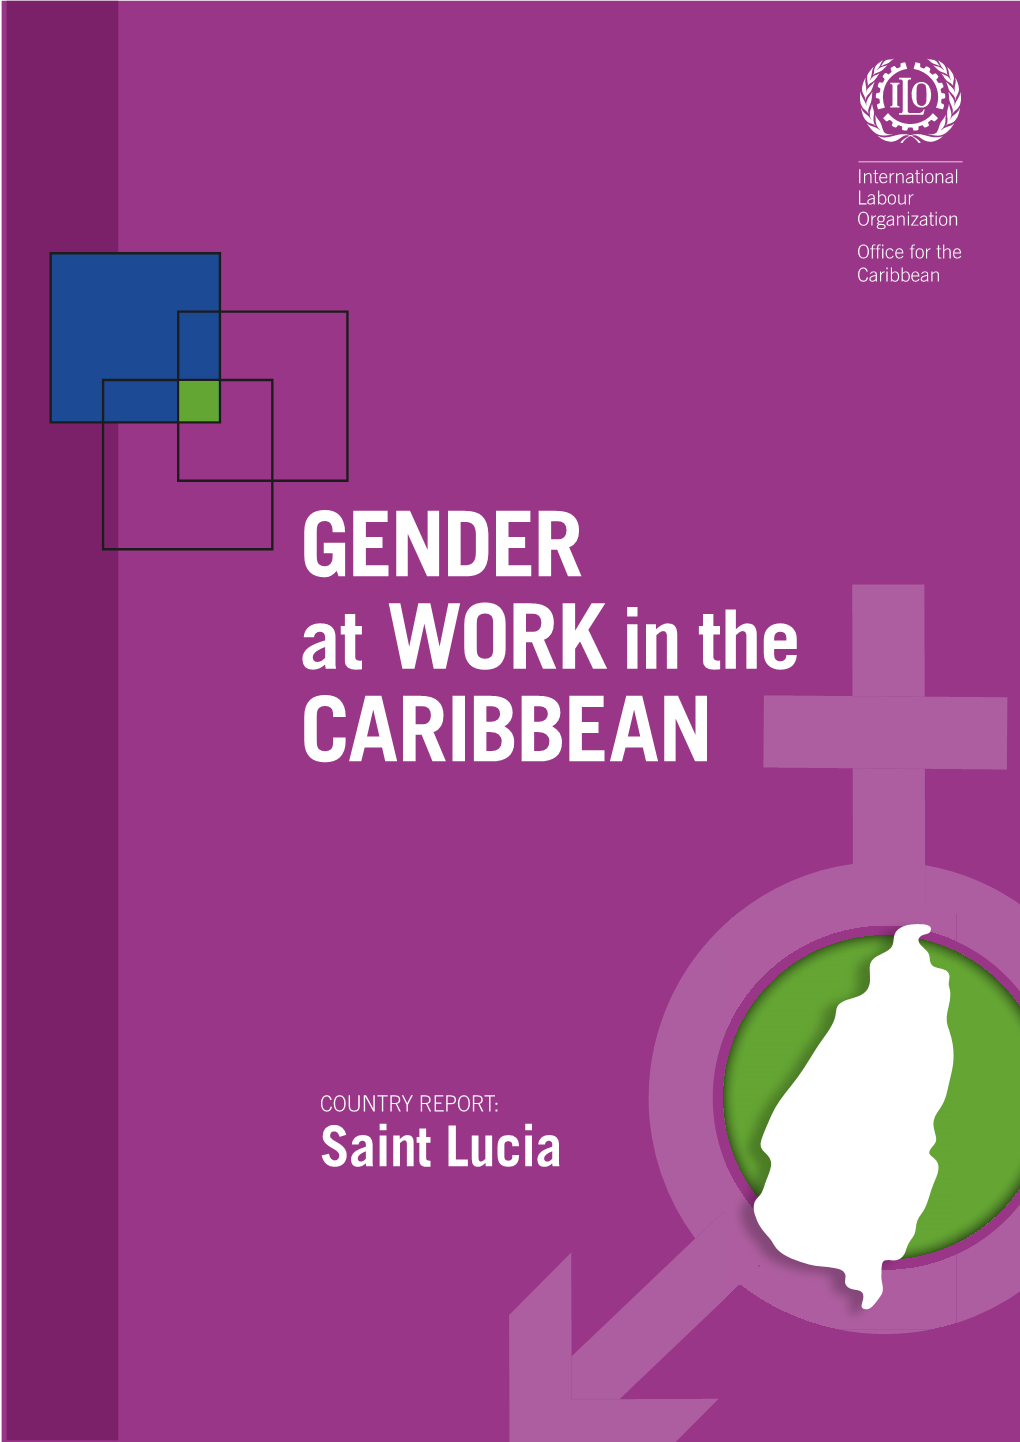 Gender at Work in the Caribbean: Country Report for Saint Lucia